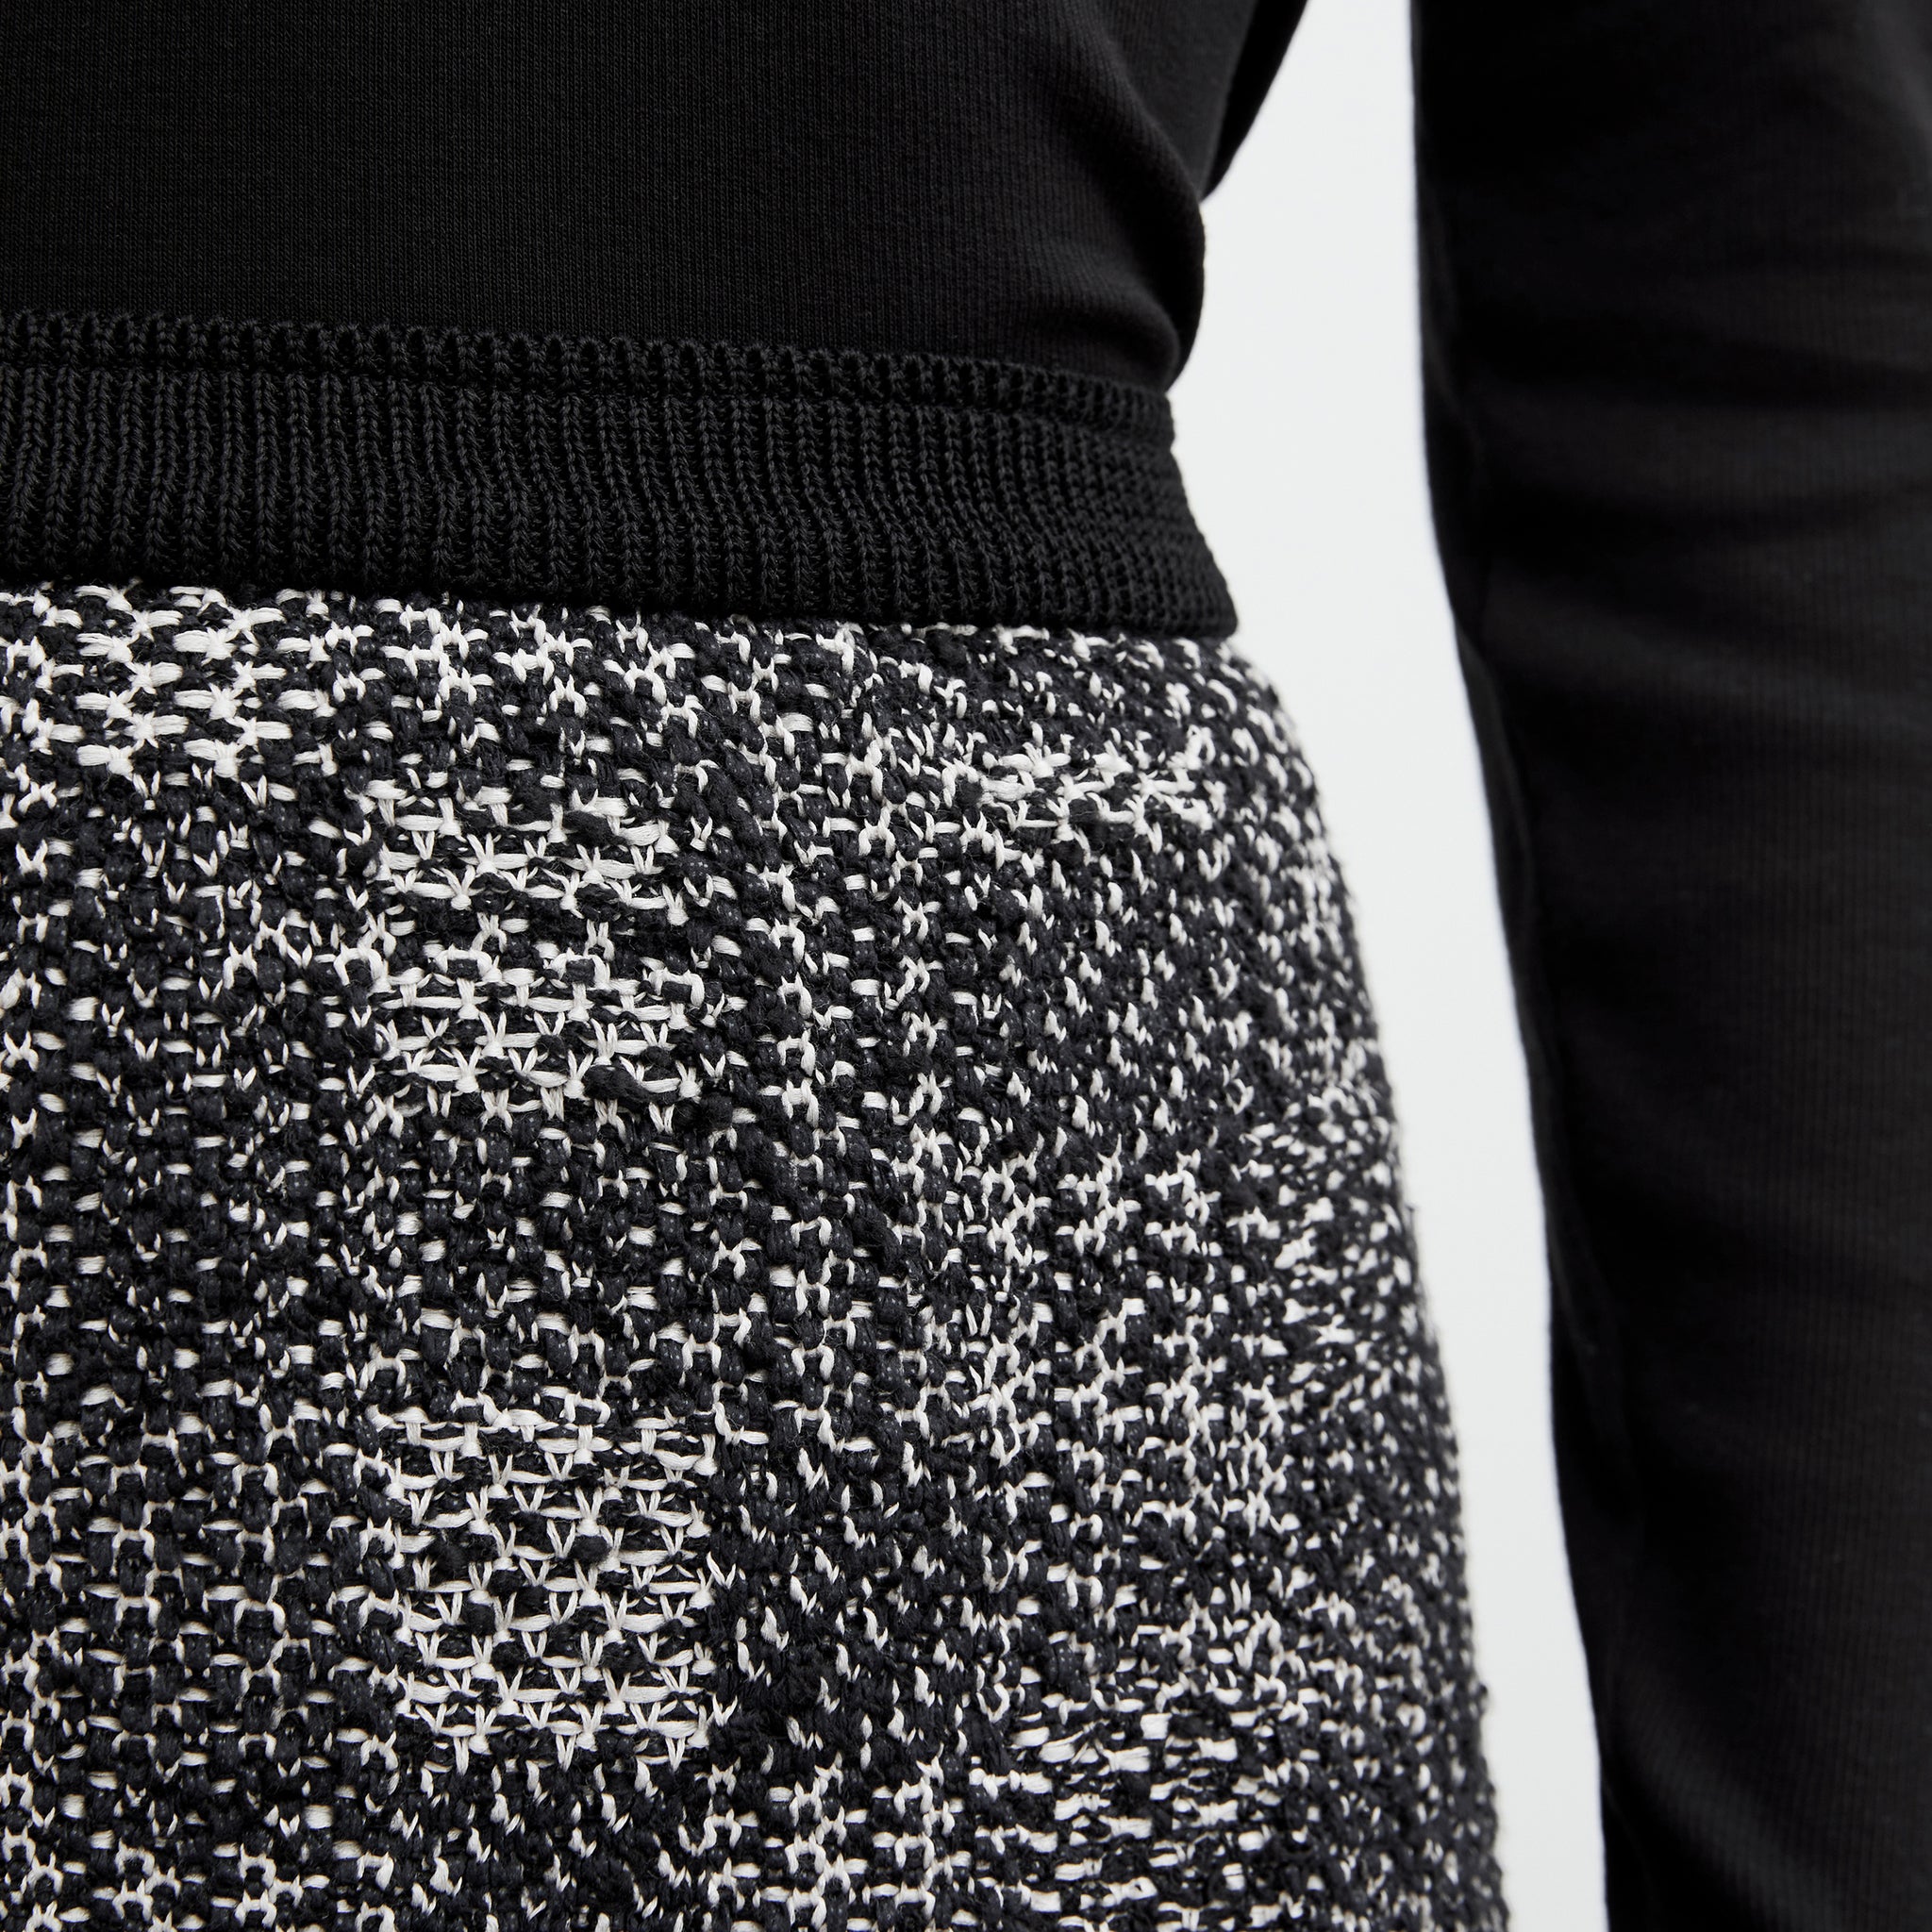 Detail image of a woman wearing the Krista Skirt - Interweave in Black / White